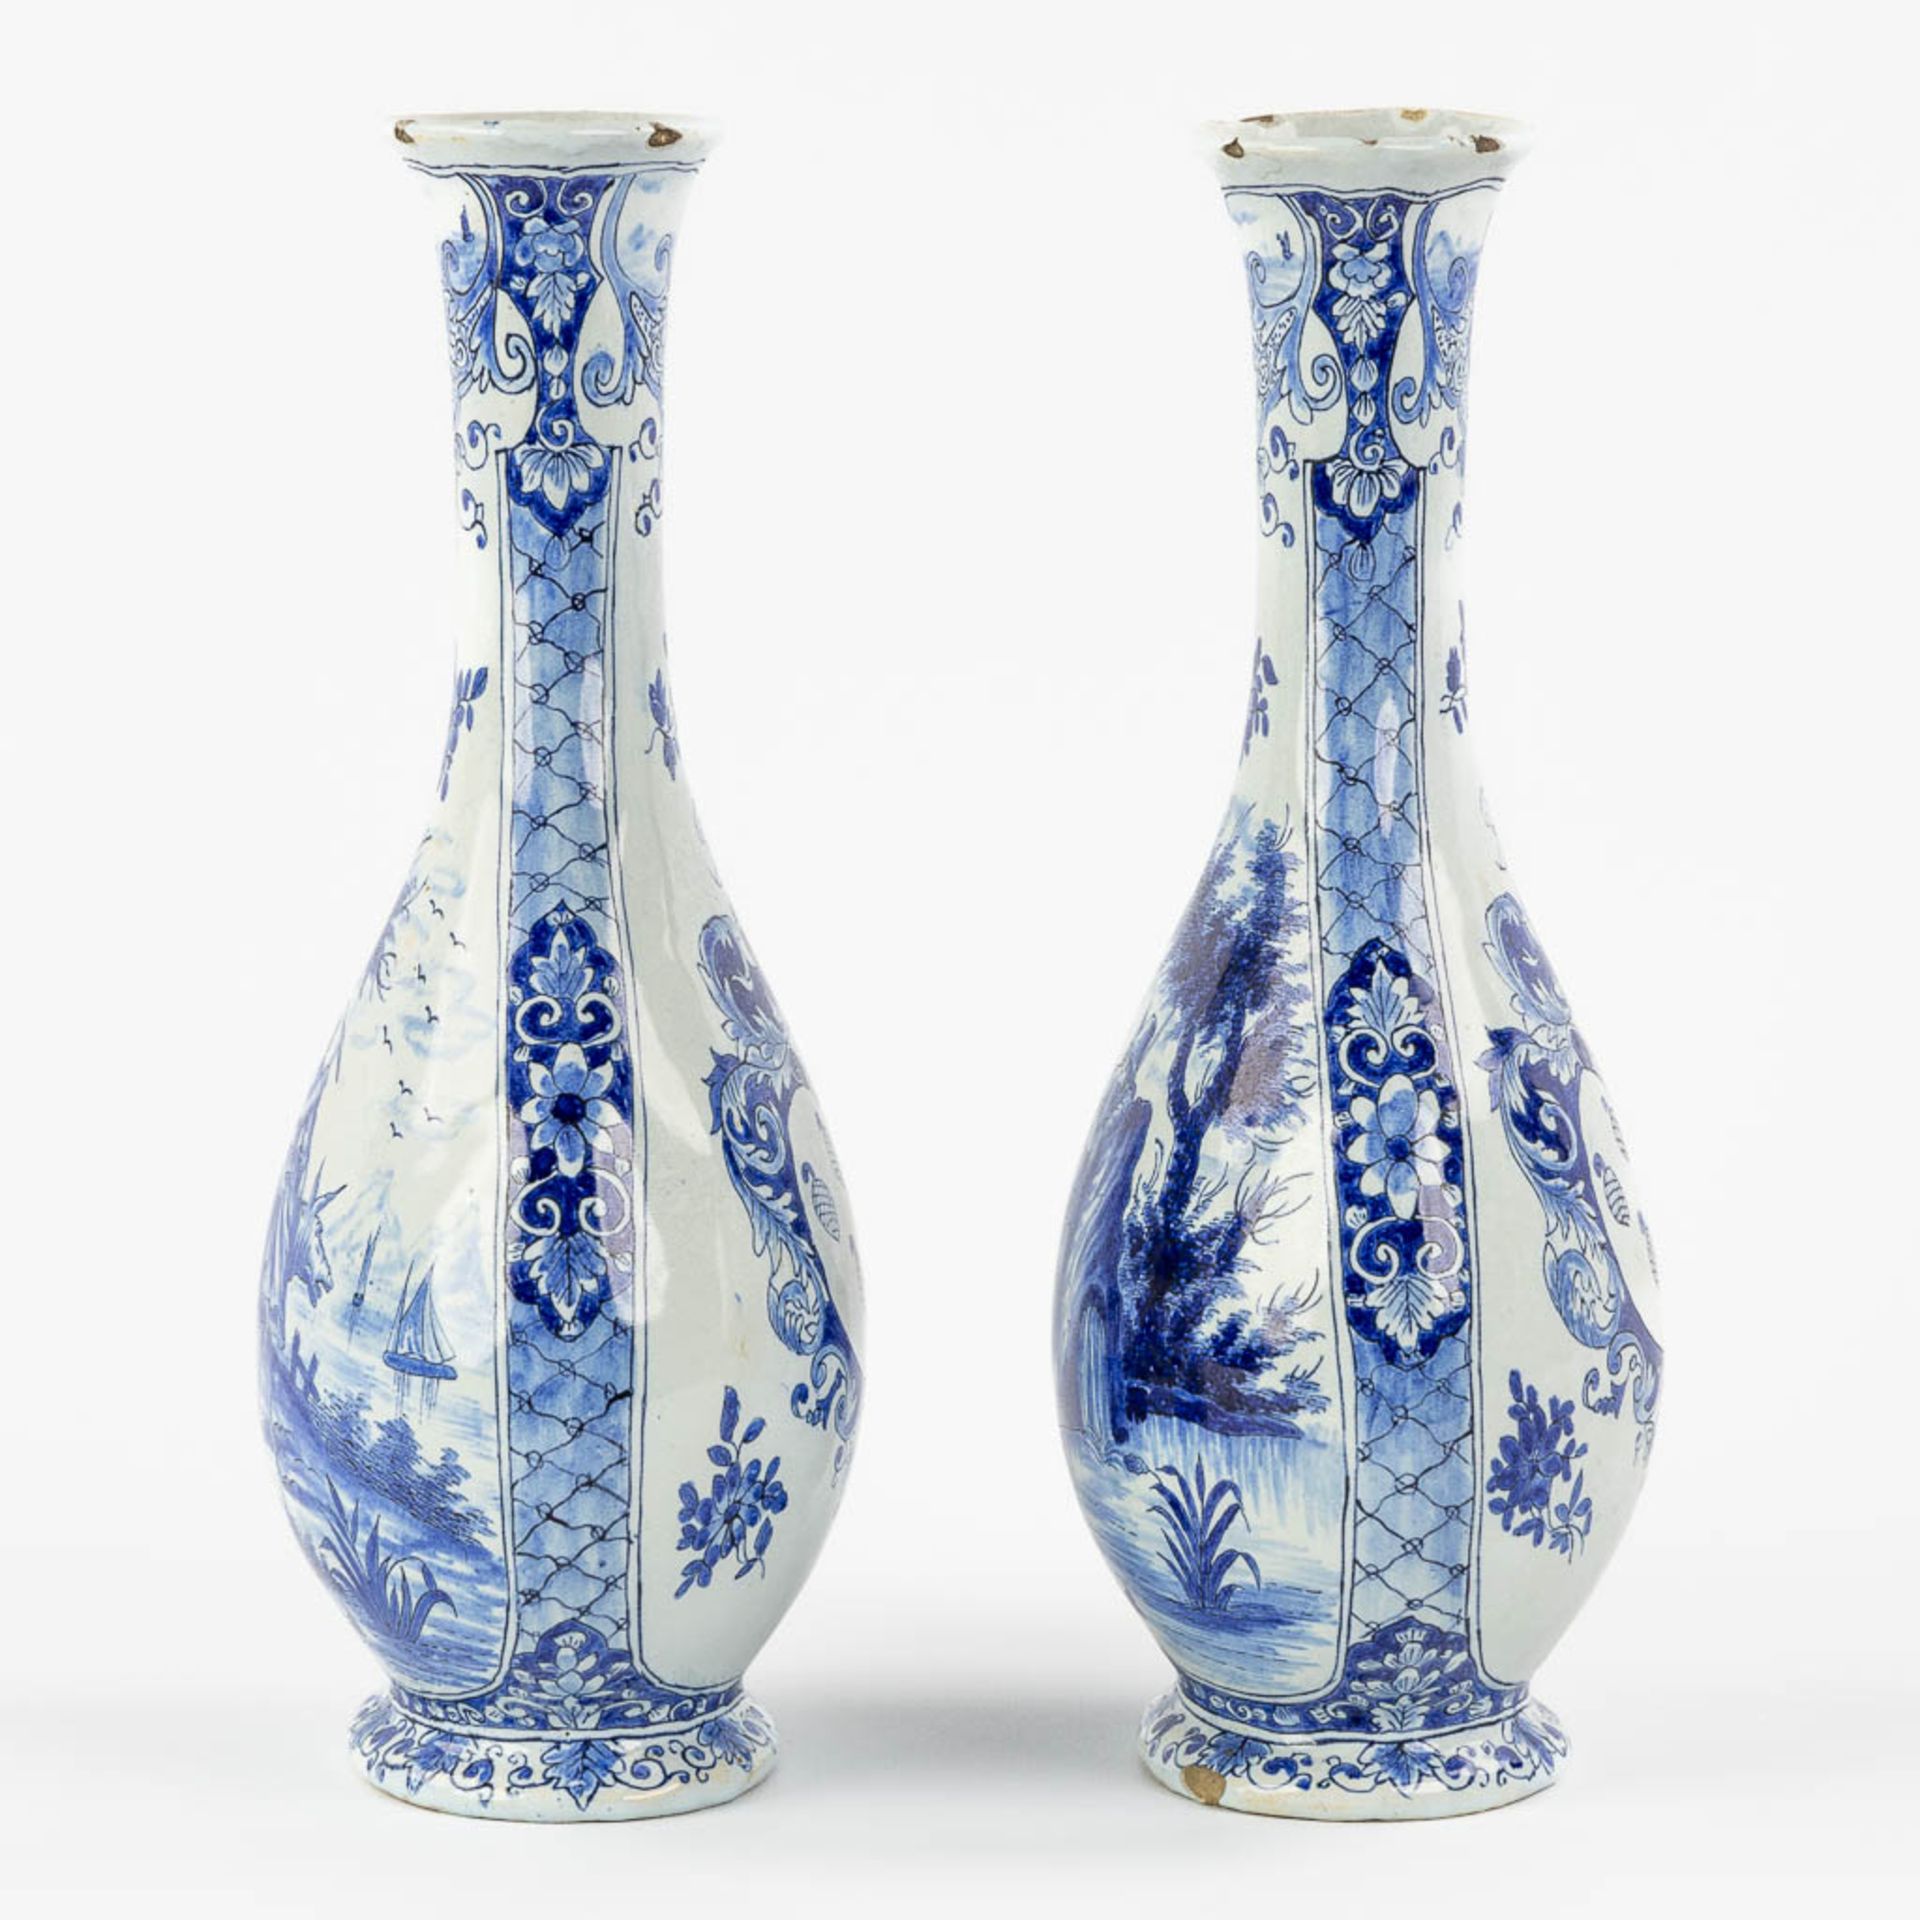 Geertrui Verstelle, Delft, a pair of vases with a landscape decor. Mid 18th C. (L:9 x W:14 x H:26,5 - Image 6 of 15